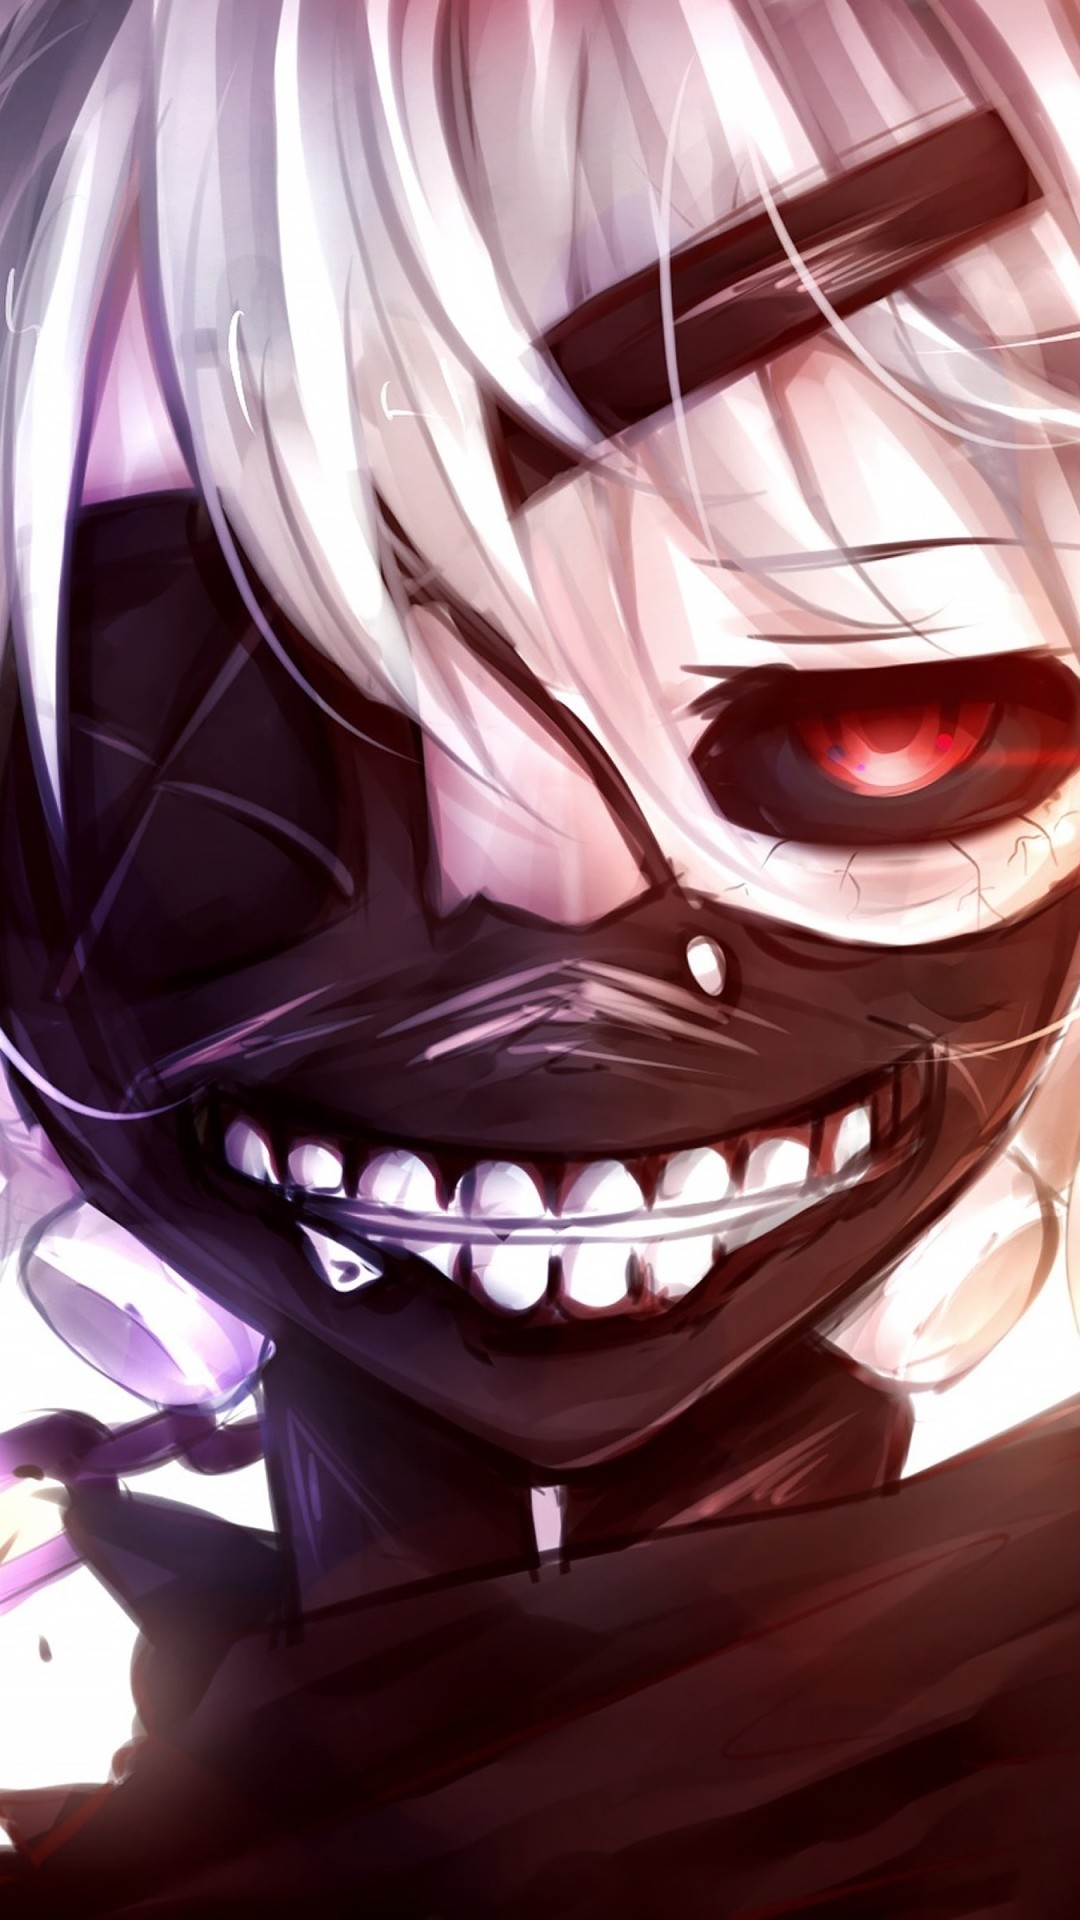 Tokyo Ghoul wallpaper for android